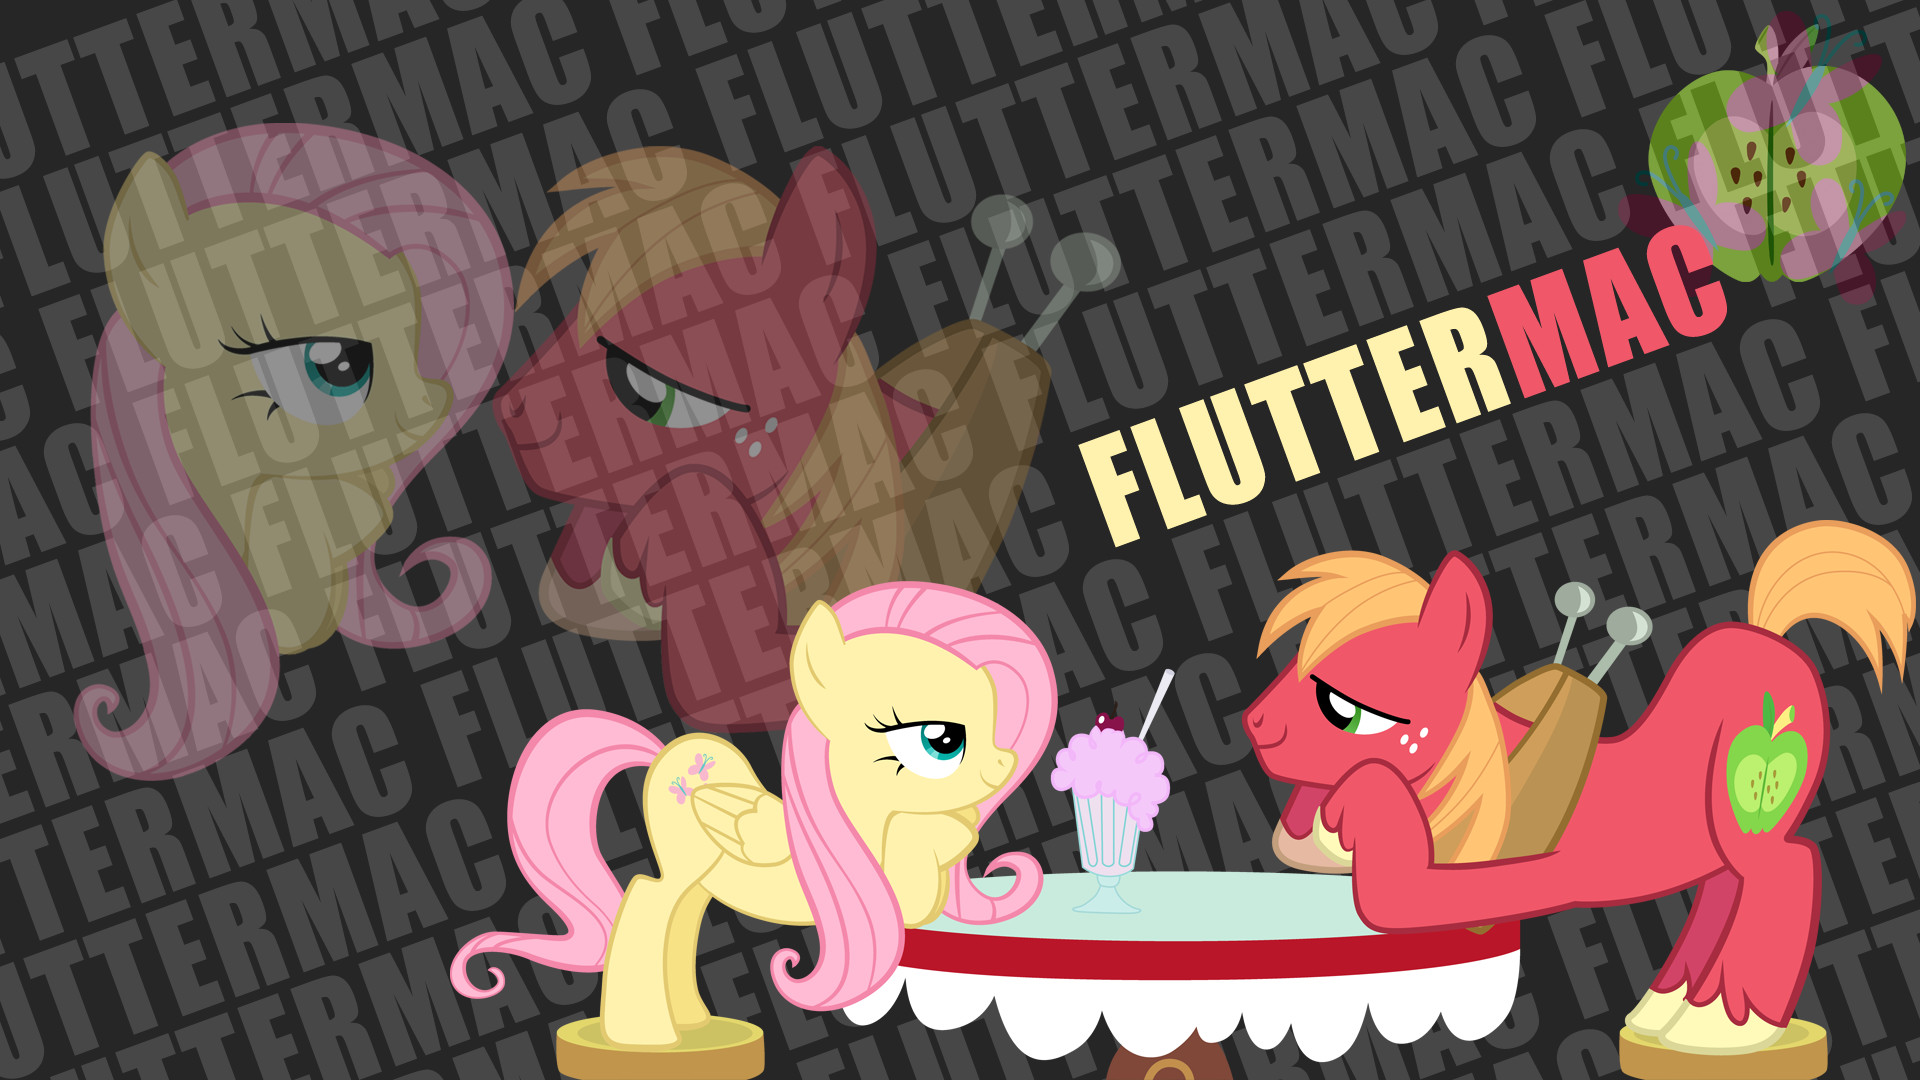 1920x1080 FlutterMac 'Text Name' Wallpaper by ahumeniy, asdflove and BlueDragonHans